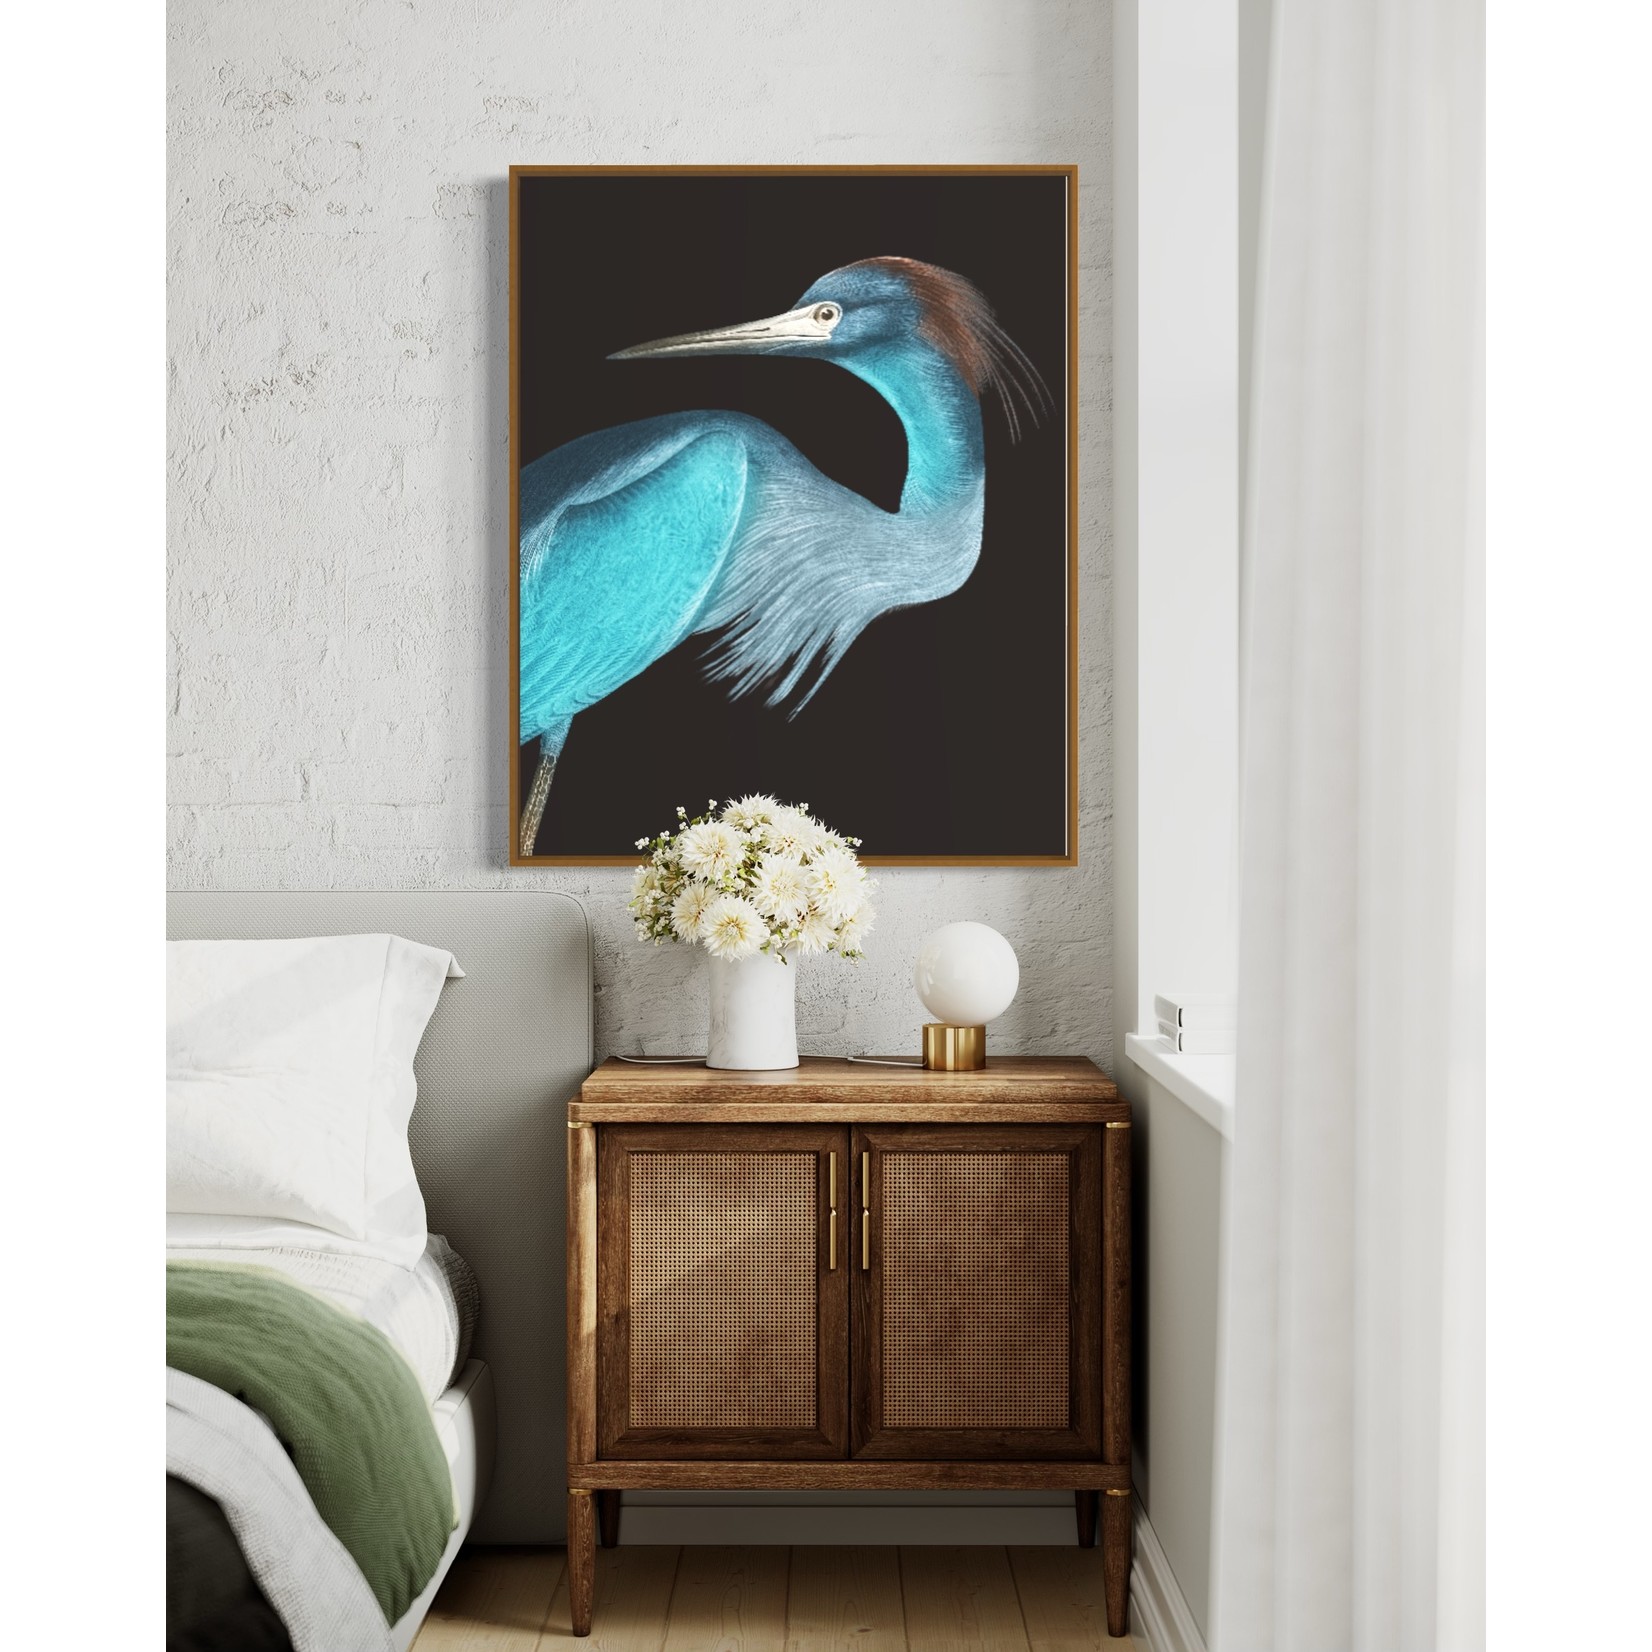 Framed Print on Canvas: Blue Crane Rectangular Canvas Print with Brushed Gold Floater Frame - 33 x 41 Inches